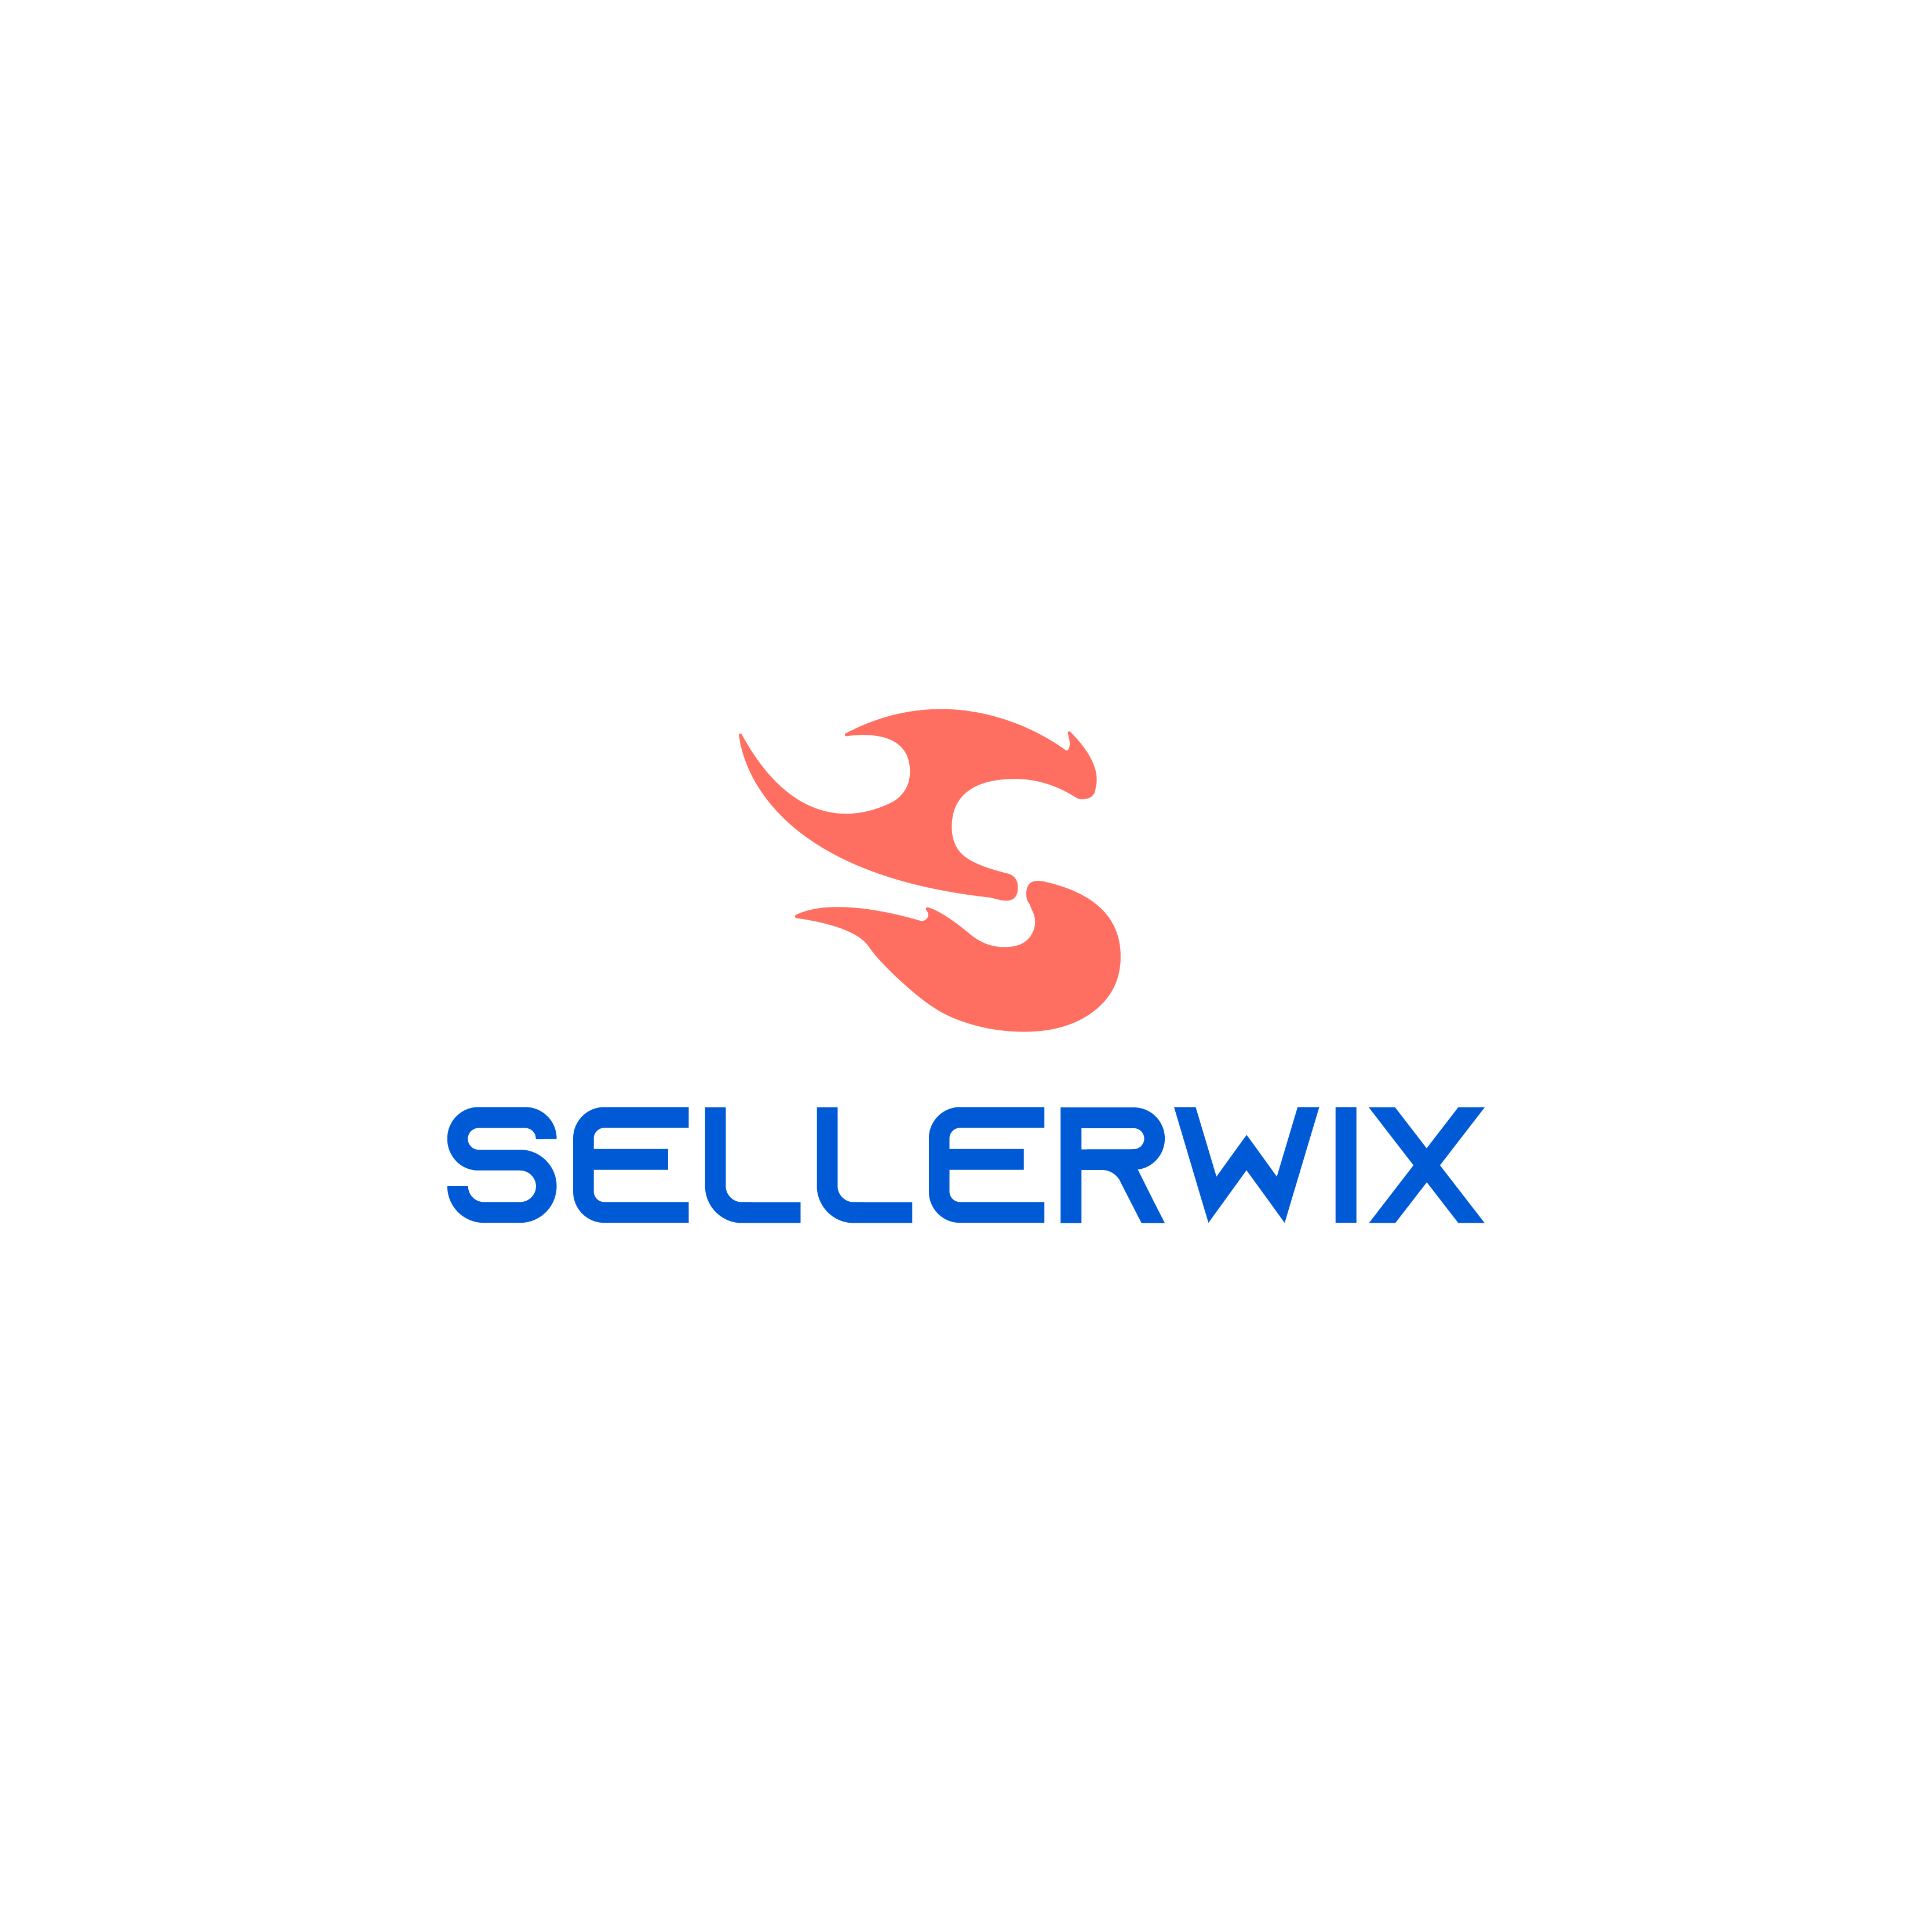 Sellerwix - Print On Demand DropShipping